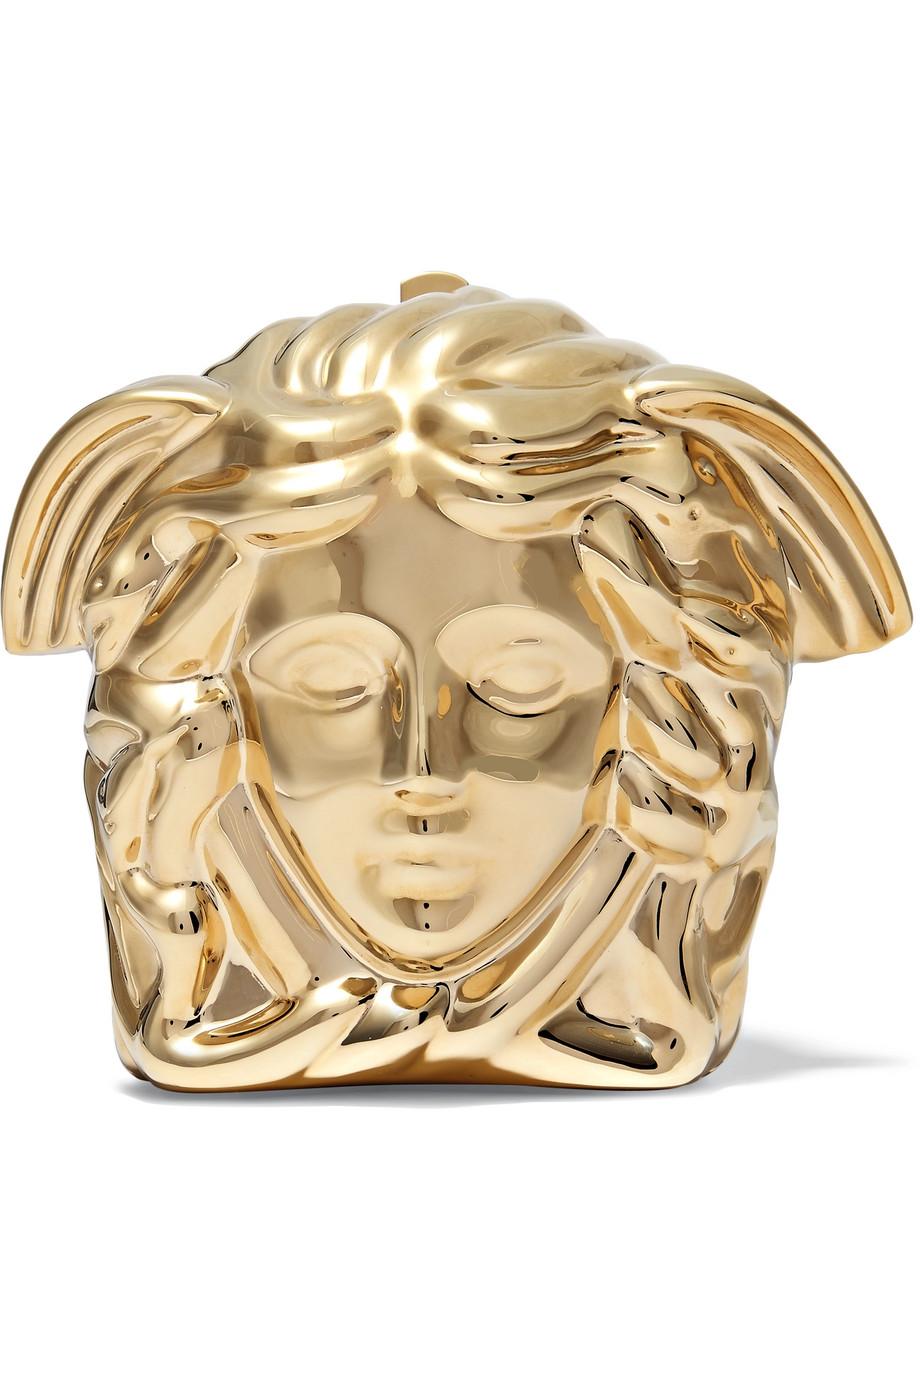 Versace clutch is expertly molded from gleaming gold-tone metal in the shape of the Medusa head - a brand signature since 1978. Handcrafted in Italy, this miniature style has a detachable chain shoulder strap and is lined in smooth black suede.